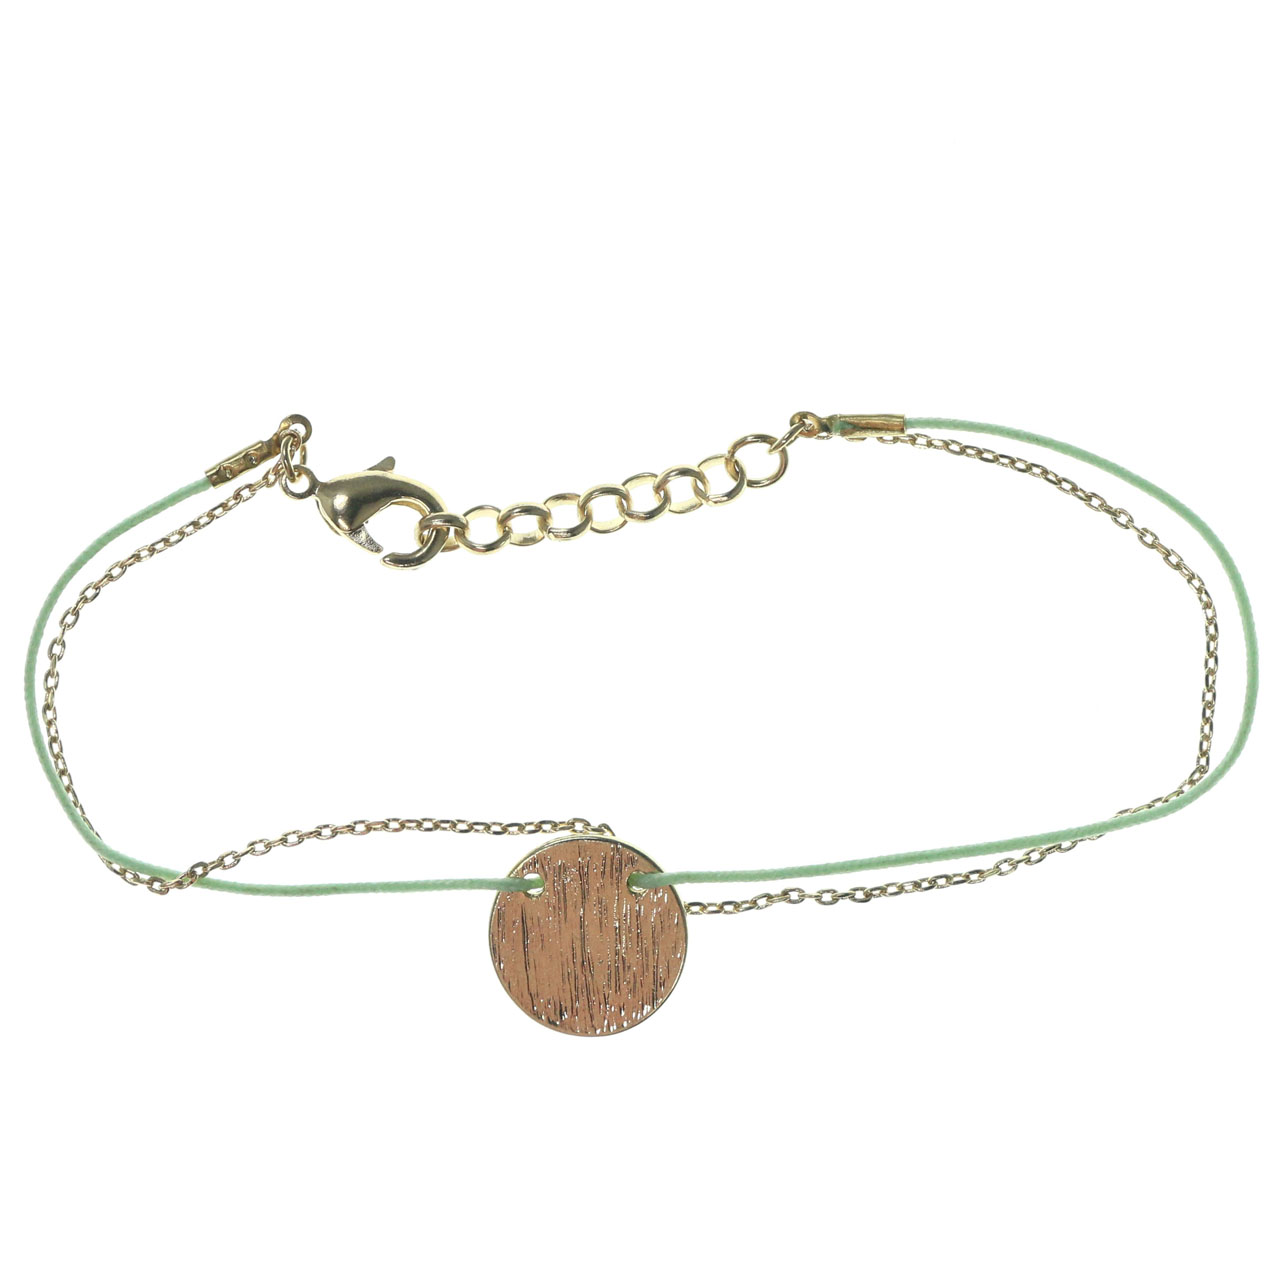 MI AMORE Thin, Light Green String Bracelet With Gold-Tone Disc